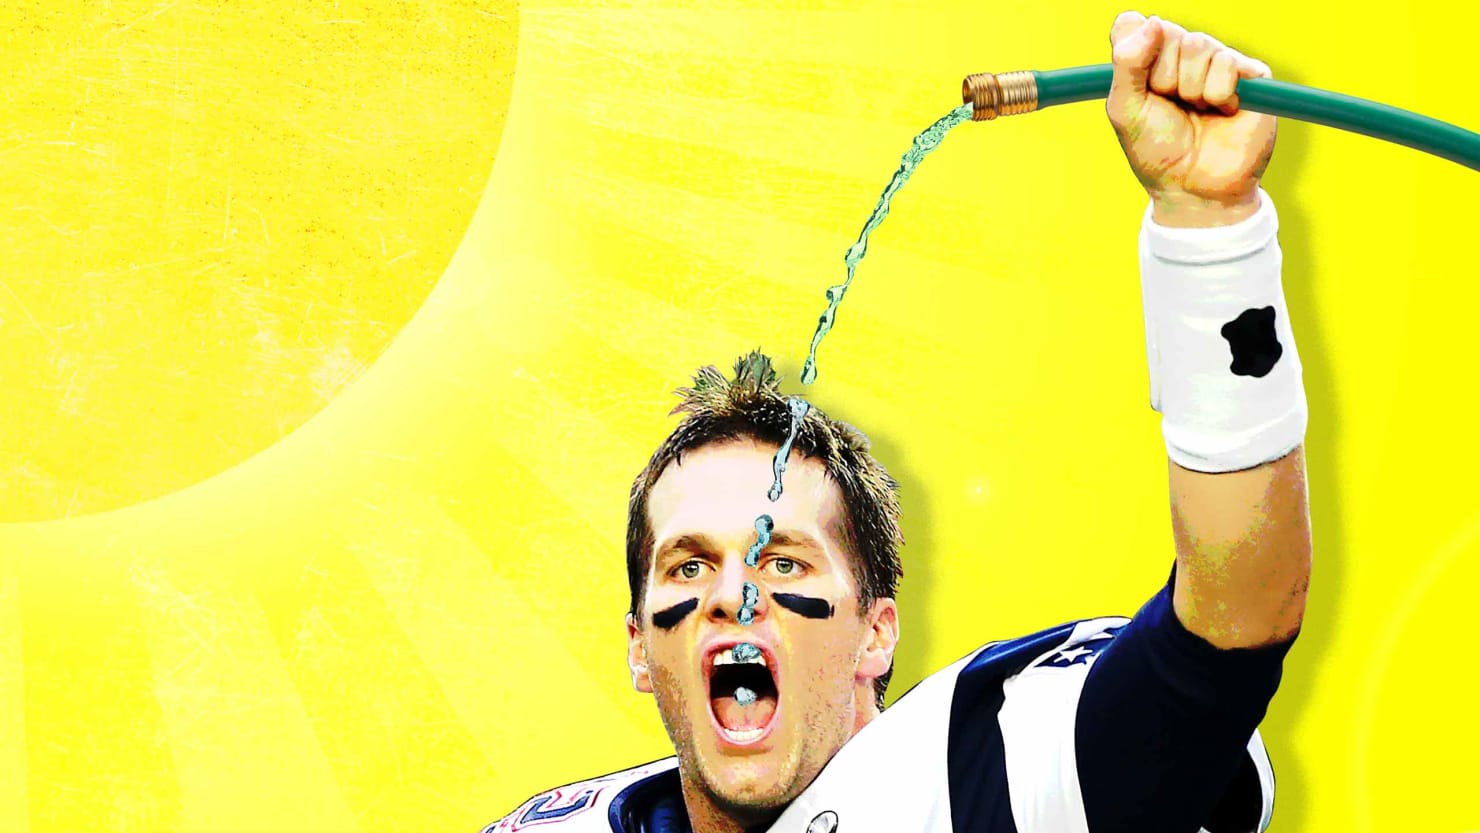 Tom Brady's 'The TB12 Method' Is Hefty but Short on Science - The